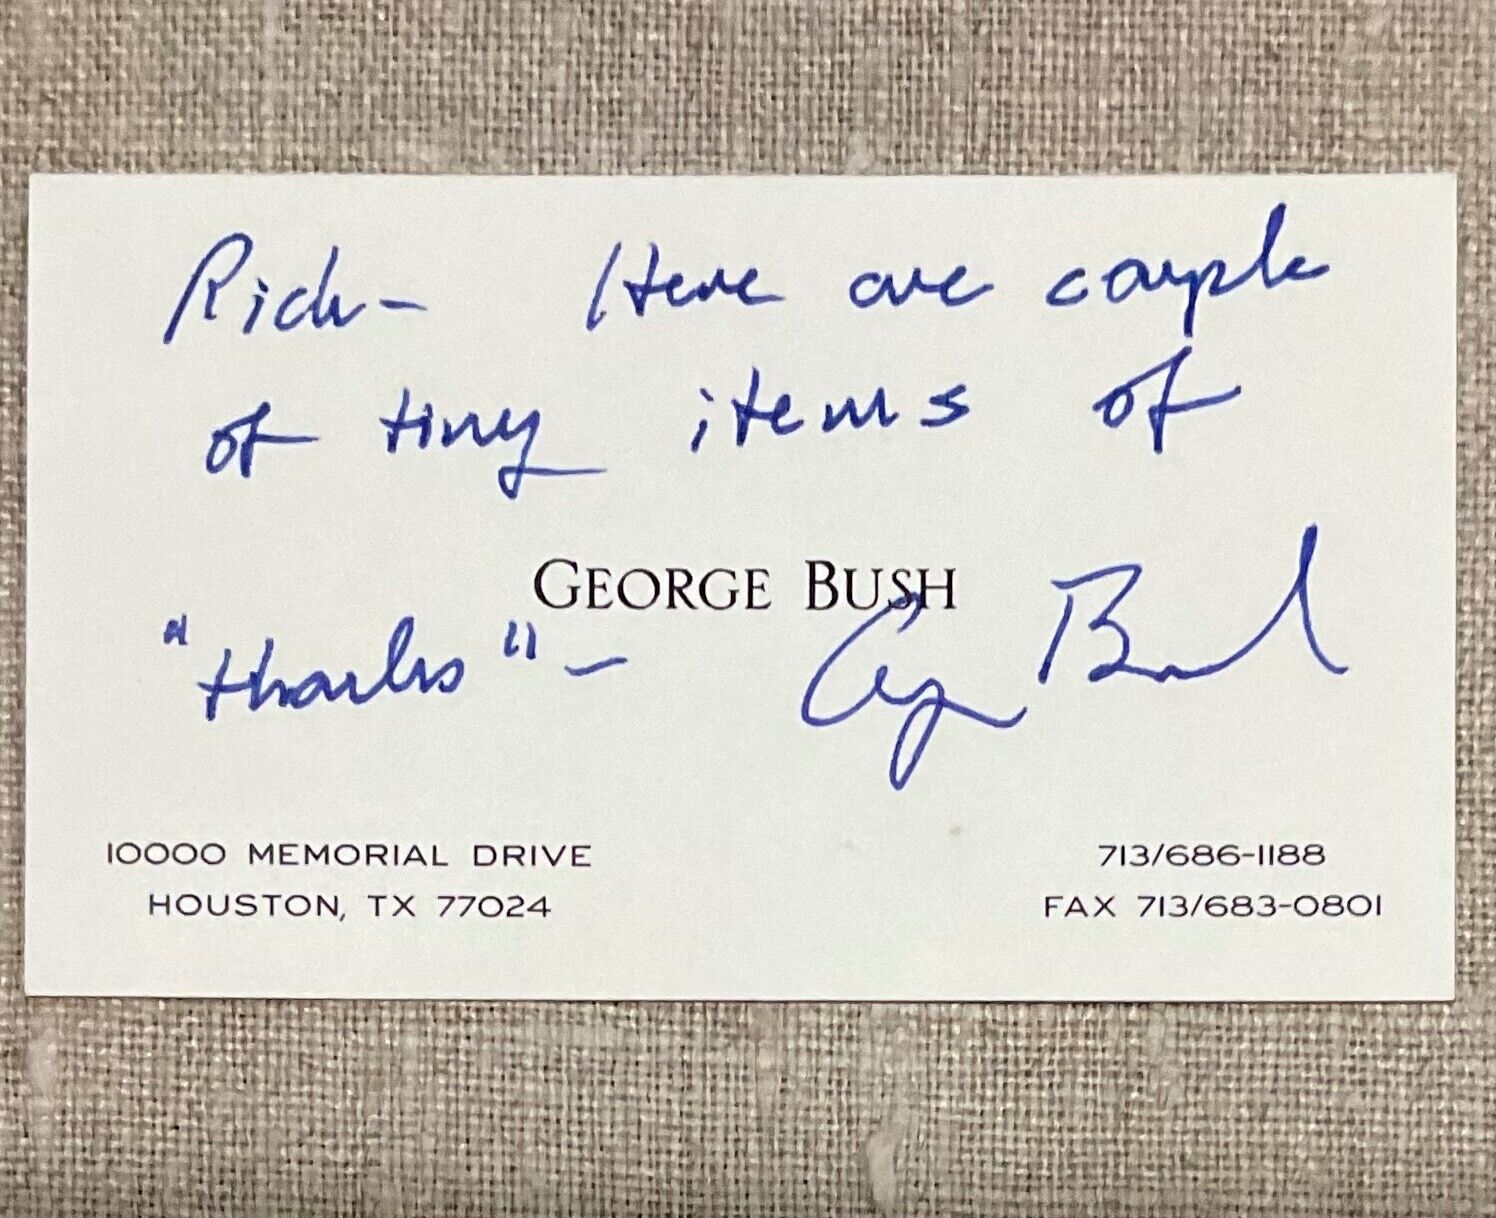 President George H. W. Bush Authentic Original Autographed Hand Signed Card